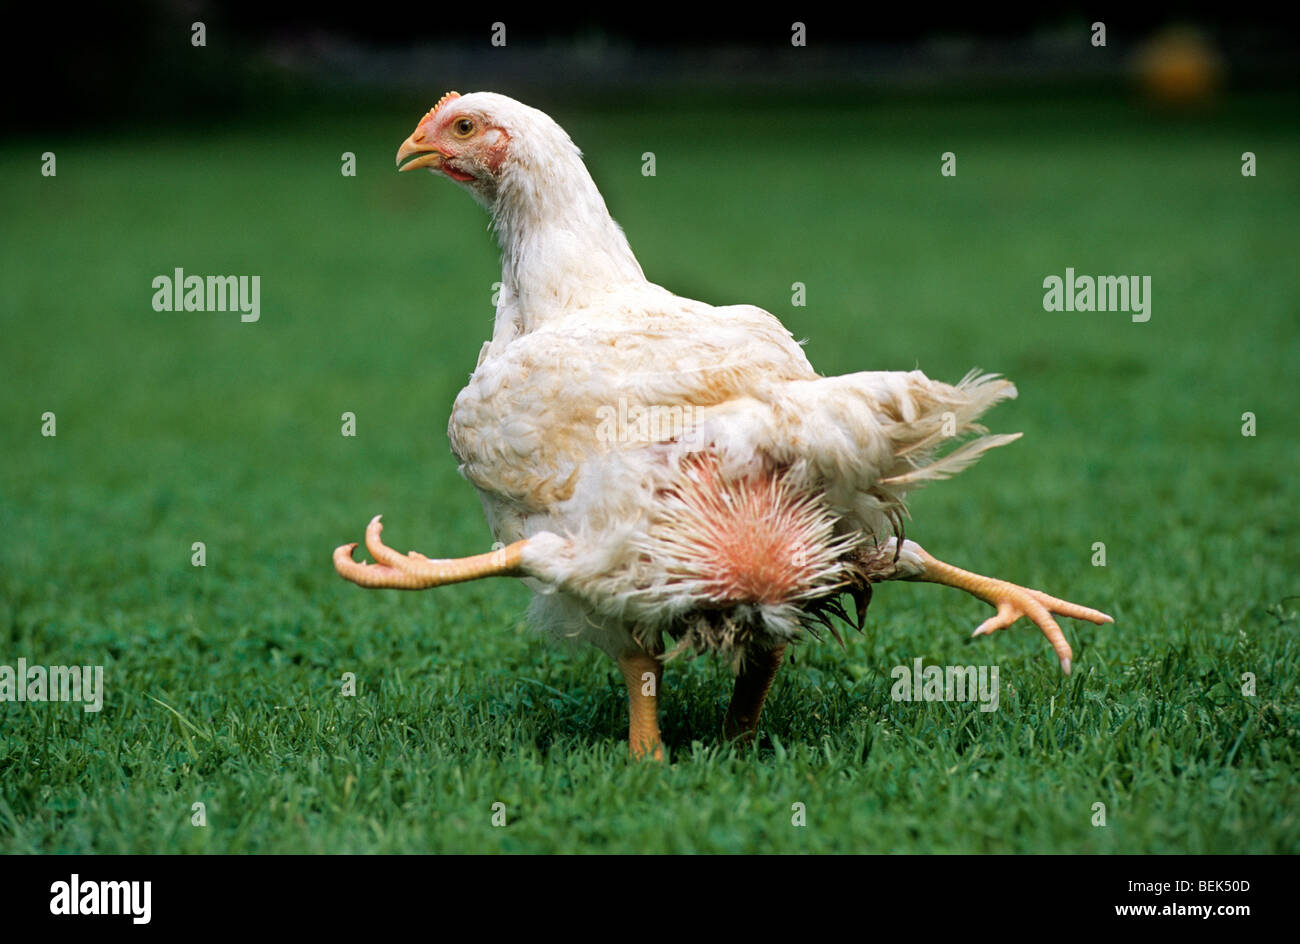 Mutated chicken with four legs, a congenital physical anomaly Stock Photo